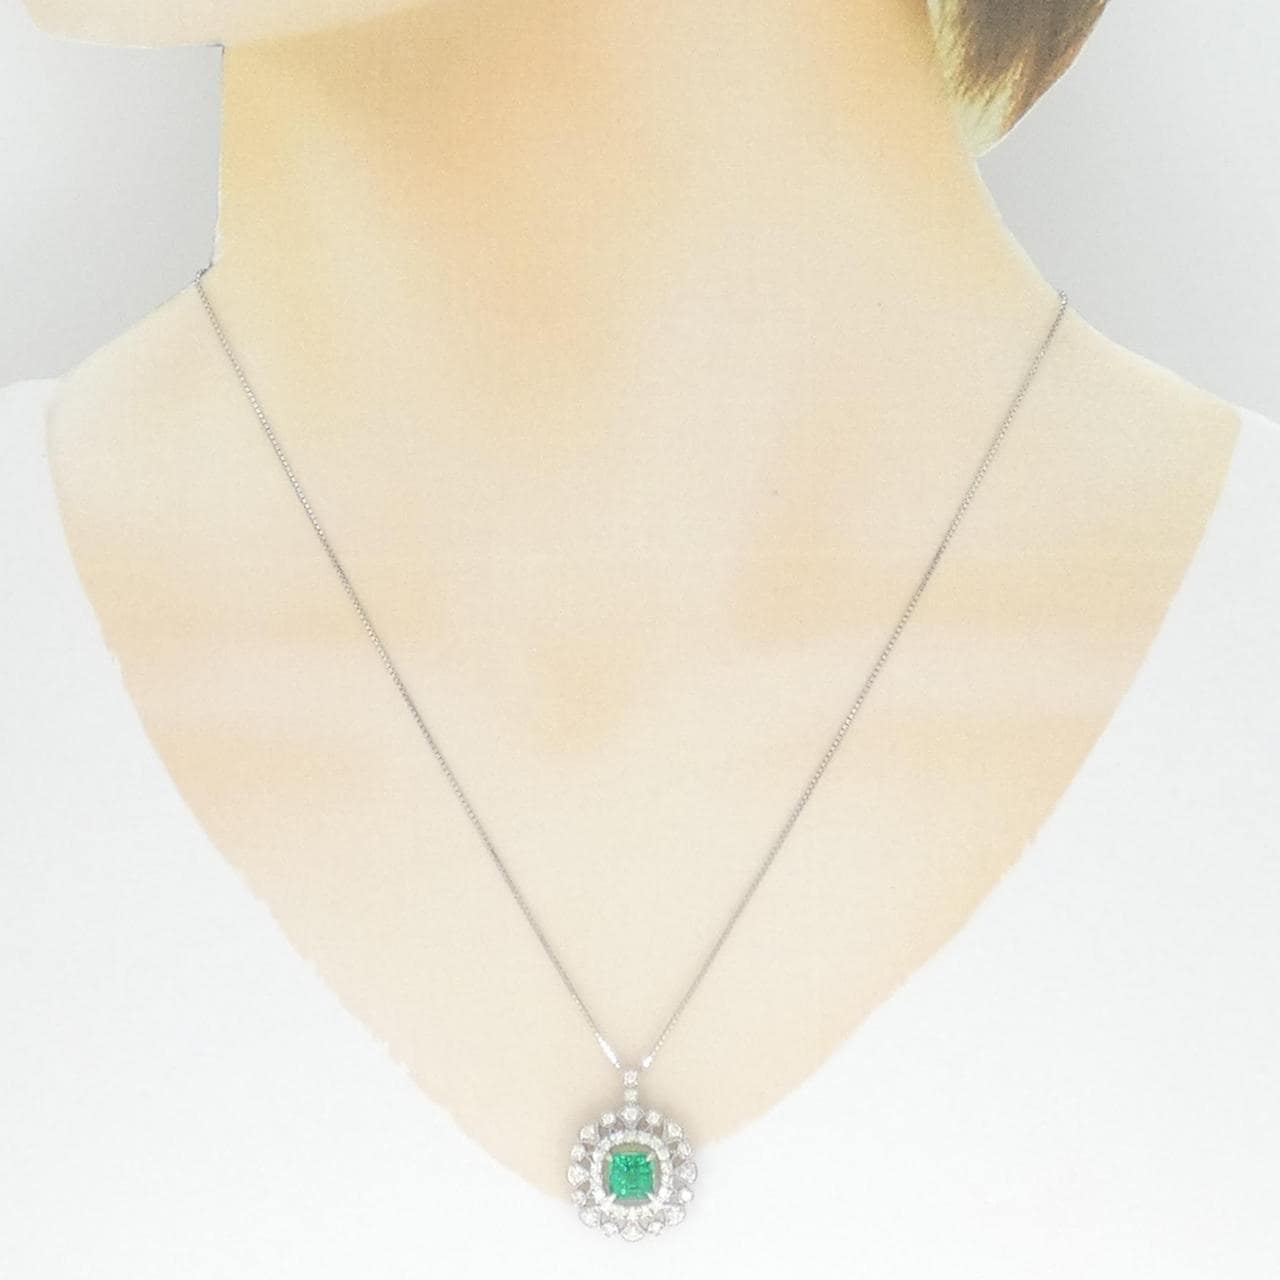 K18WG emerald necklace 1.278CT Colombian